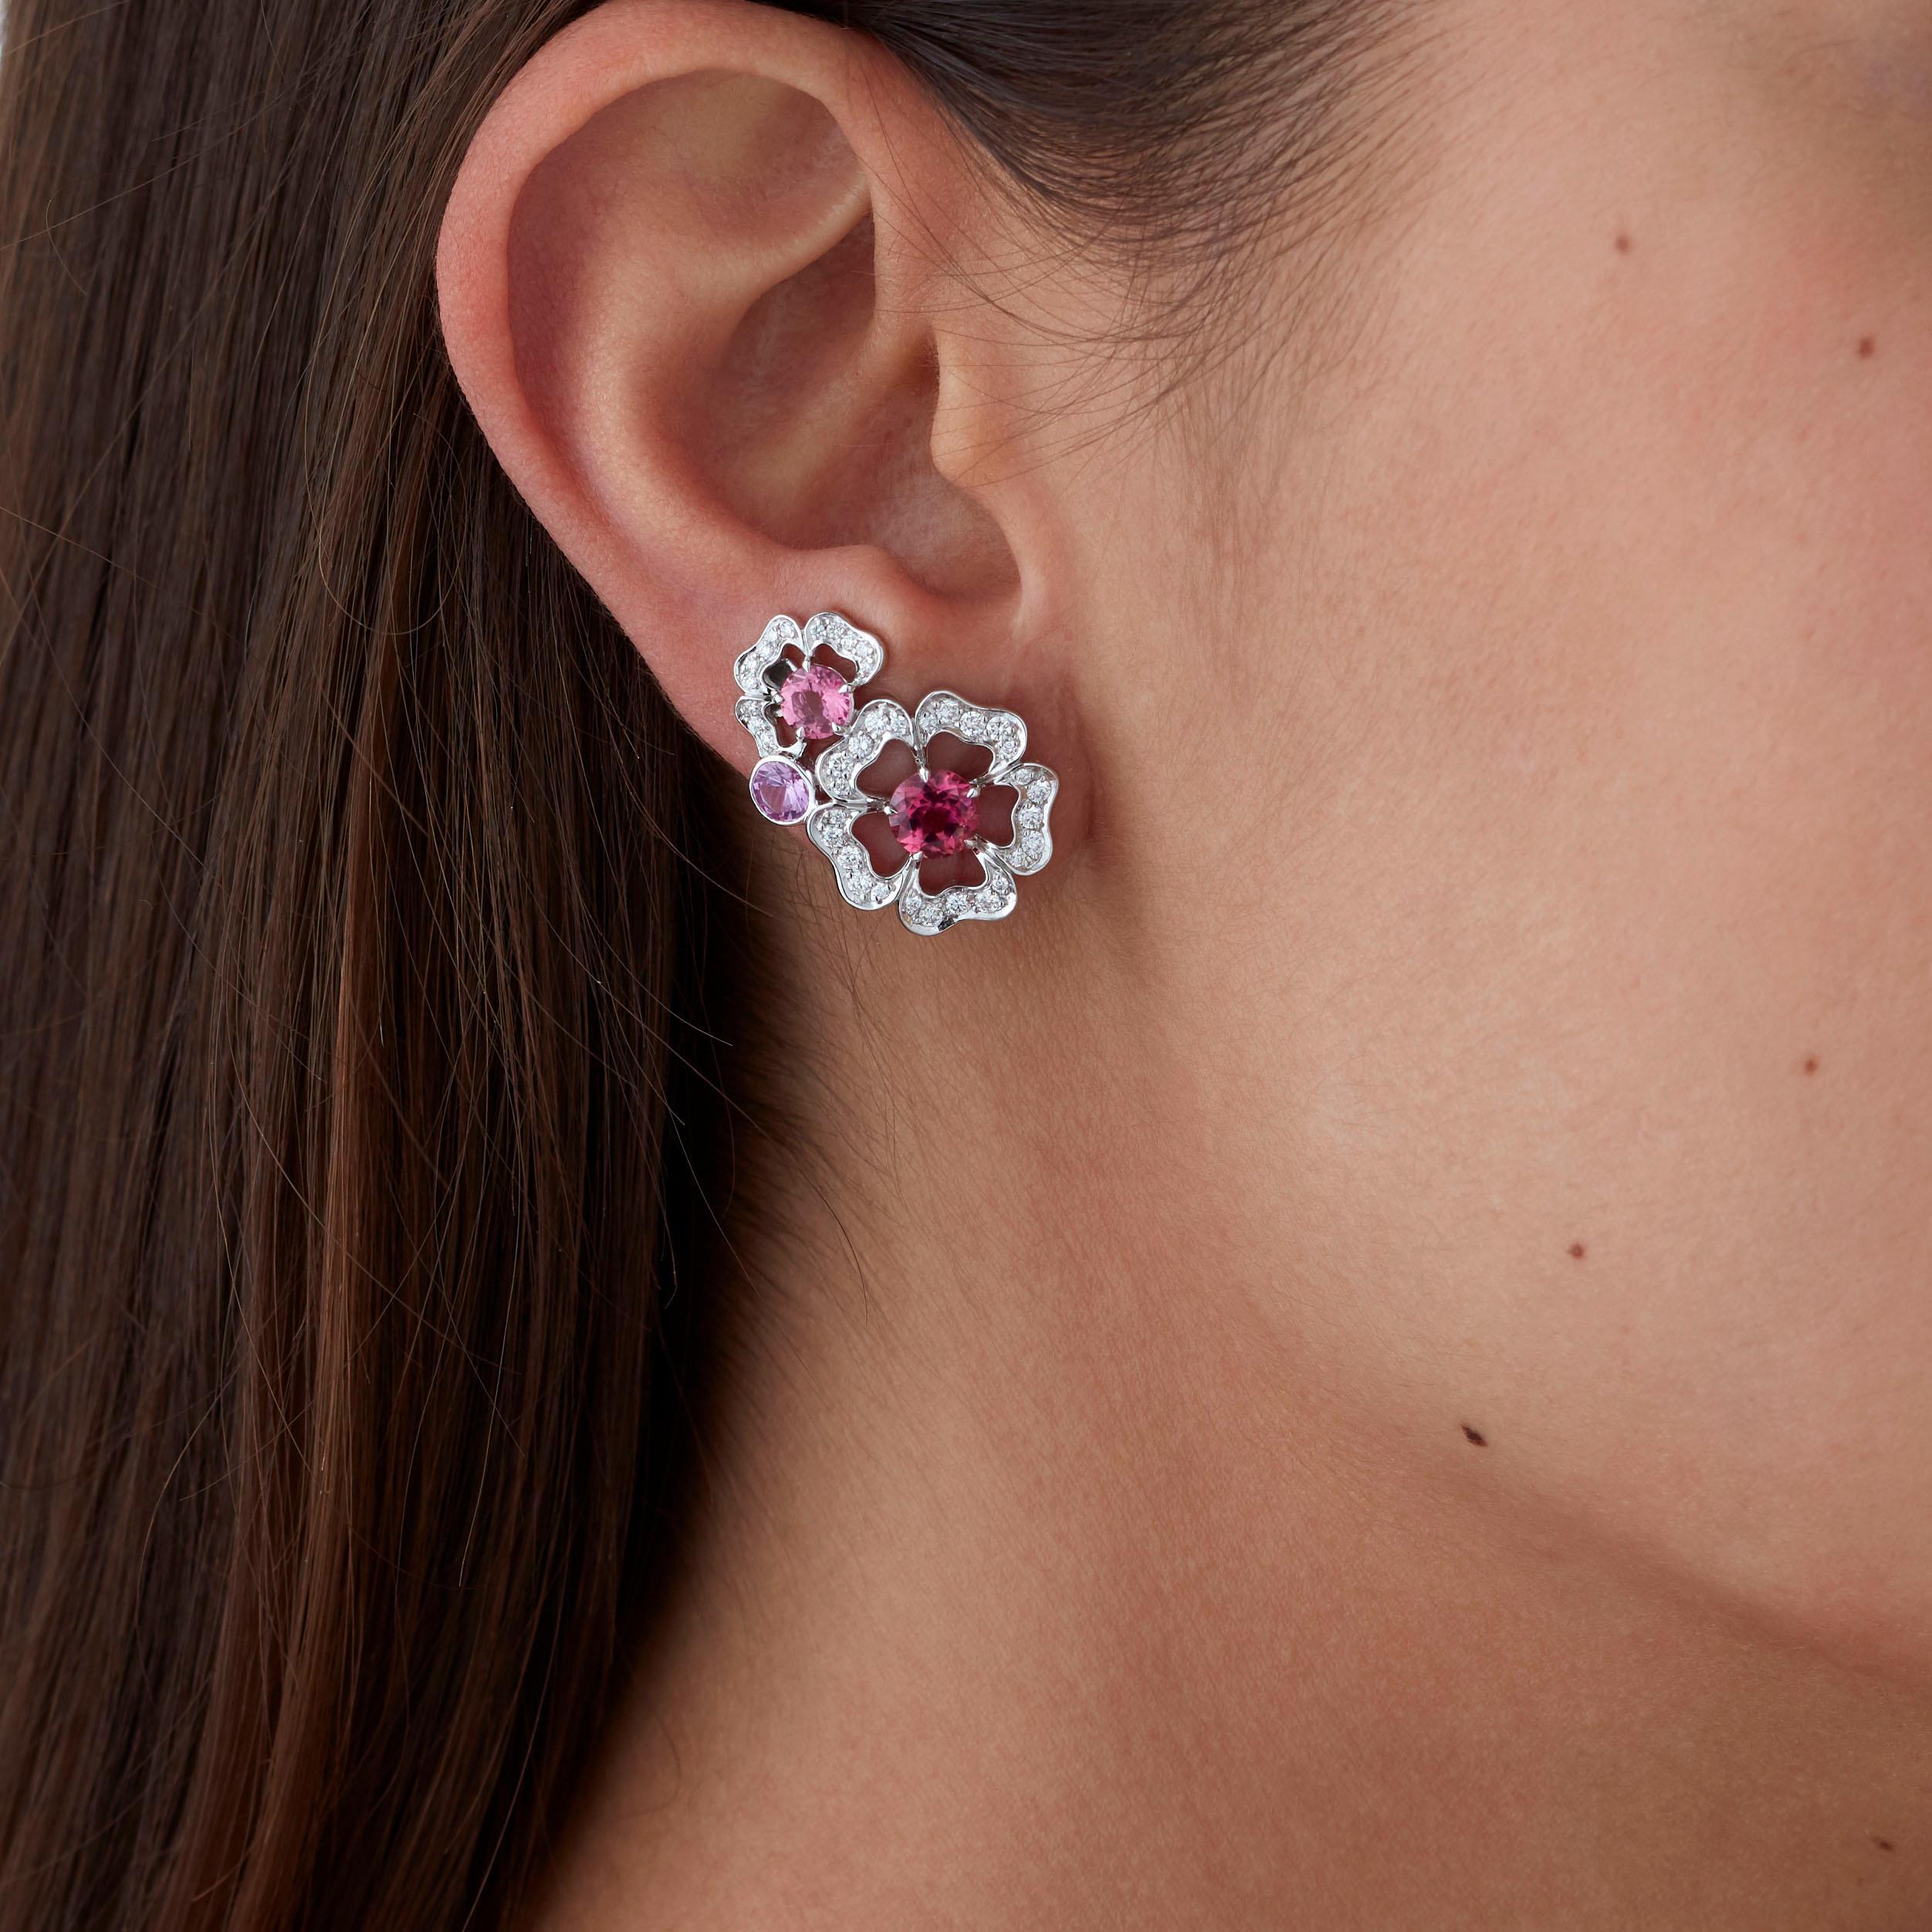 A House of Garrard pair of 18 karat white gold ear climbers from the 'Tudor Rose Petal' collection set with tourmalines, pink sapphires, rubellites and round white diamonds. 

2 round rubellites weighing: 1.22cts
2 round pink tourmalines weighing: